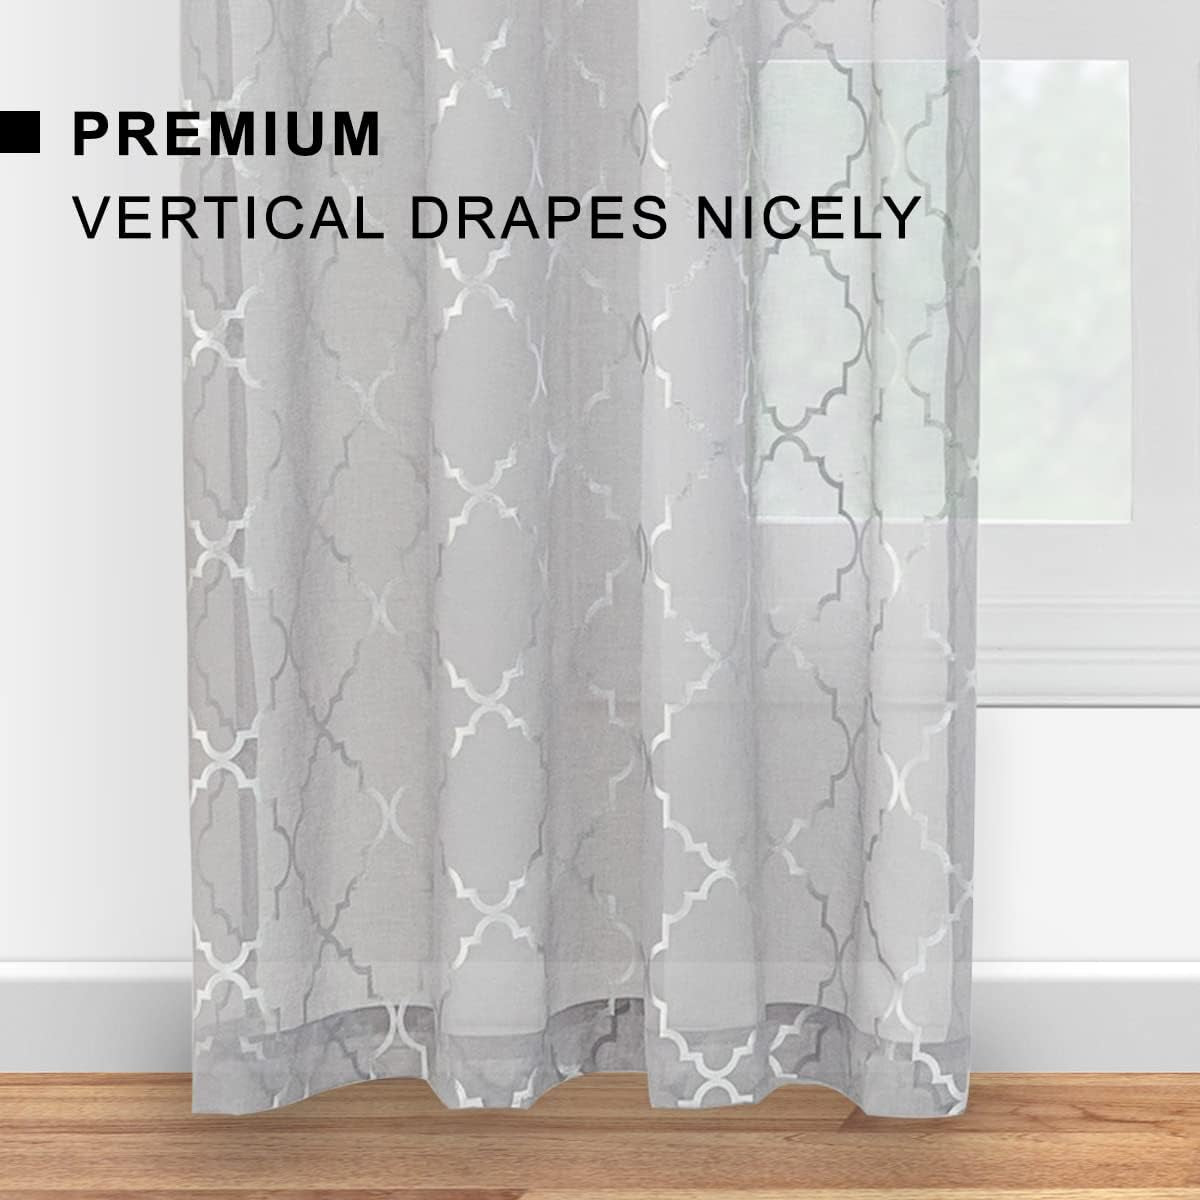 Kotile Silver Grey Sheer Curtains 96 Inch - Metallic Silver Foil Moroccan Tile Printed Rod Pocket Privacy Light Filtering Curtains for Living Room, 52 X 96 Inches, 2 Panels, Grey and Silver  Kotile Textile   